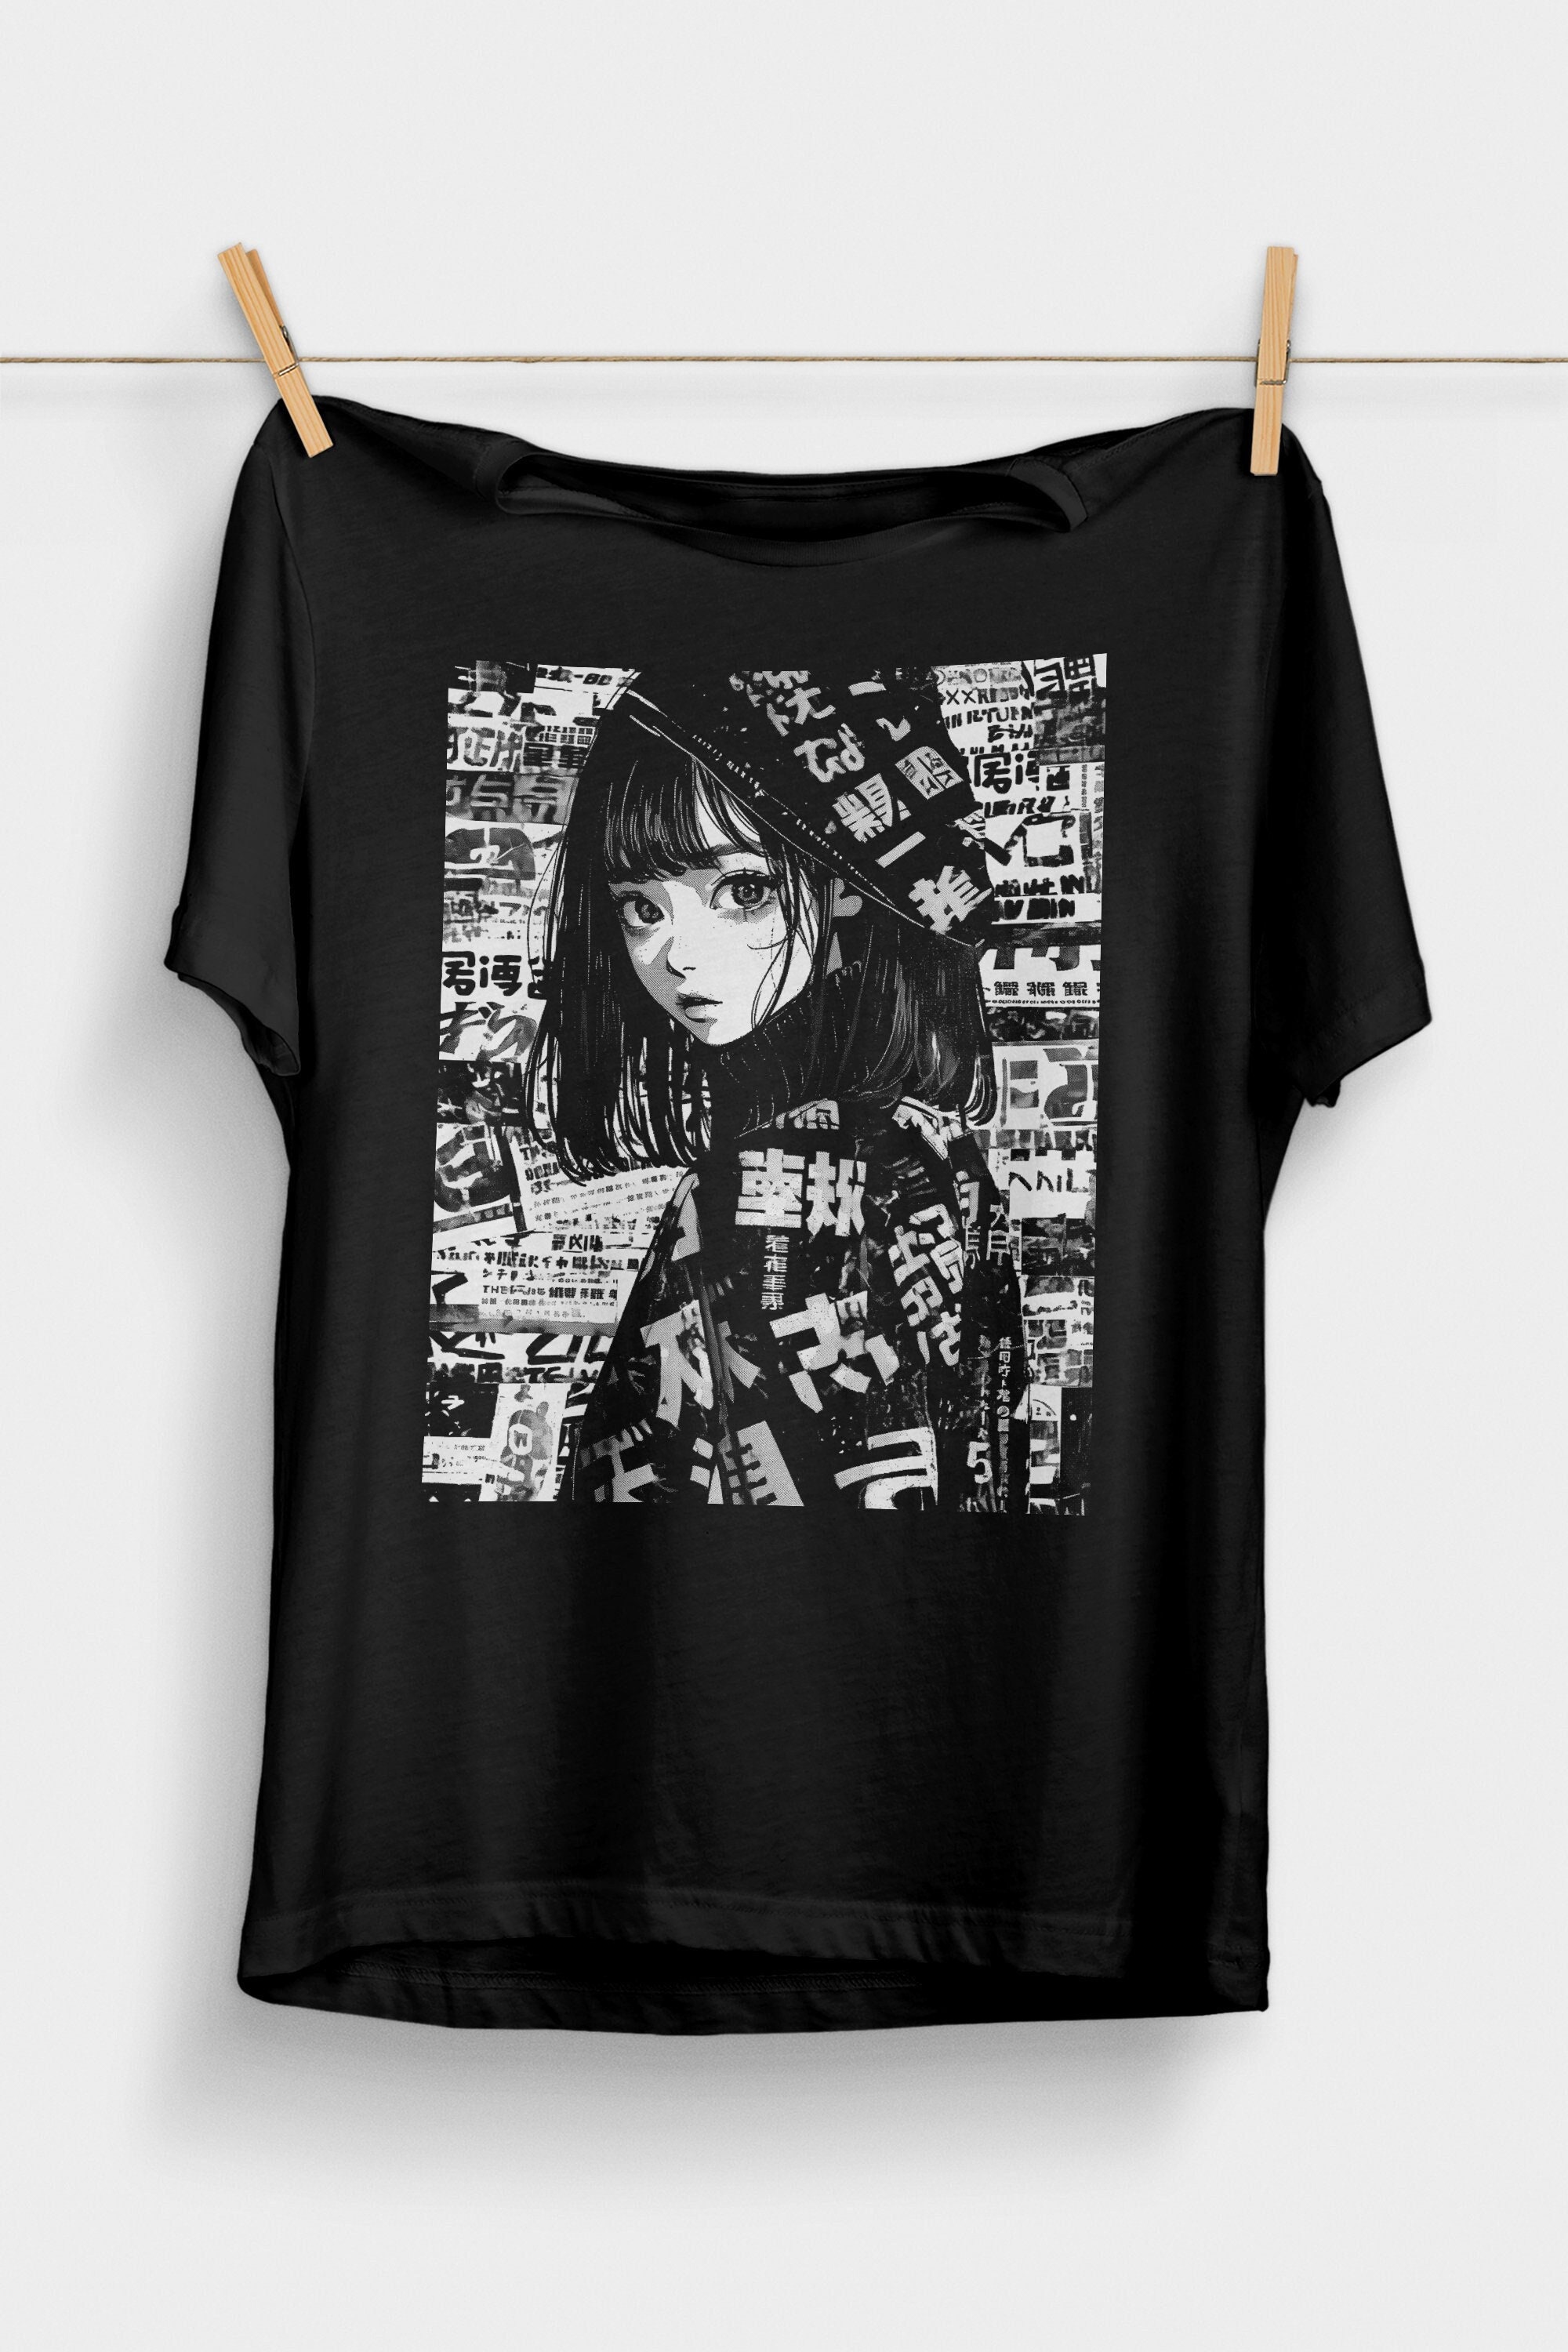 Narkomaniks anime style girl with devil wings Essential T-Shirtundefined  by SmarteSHtore